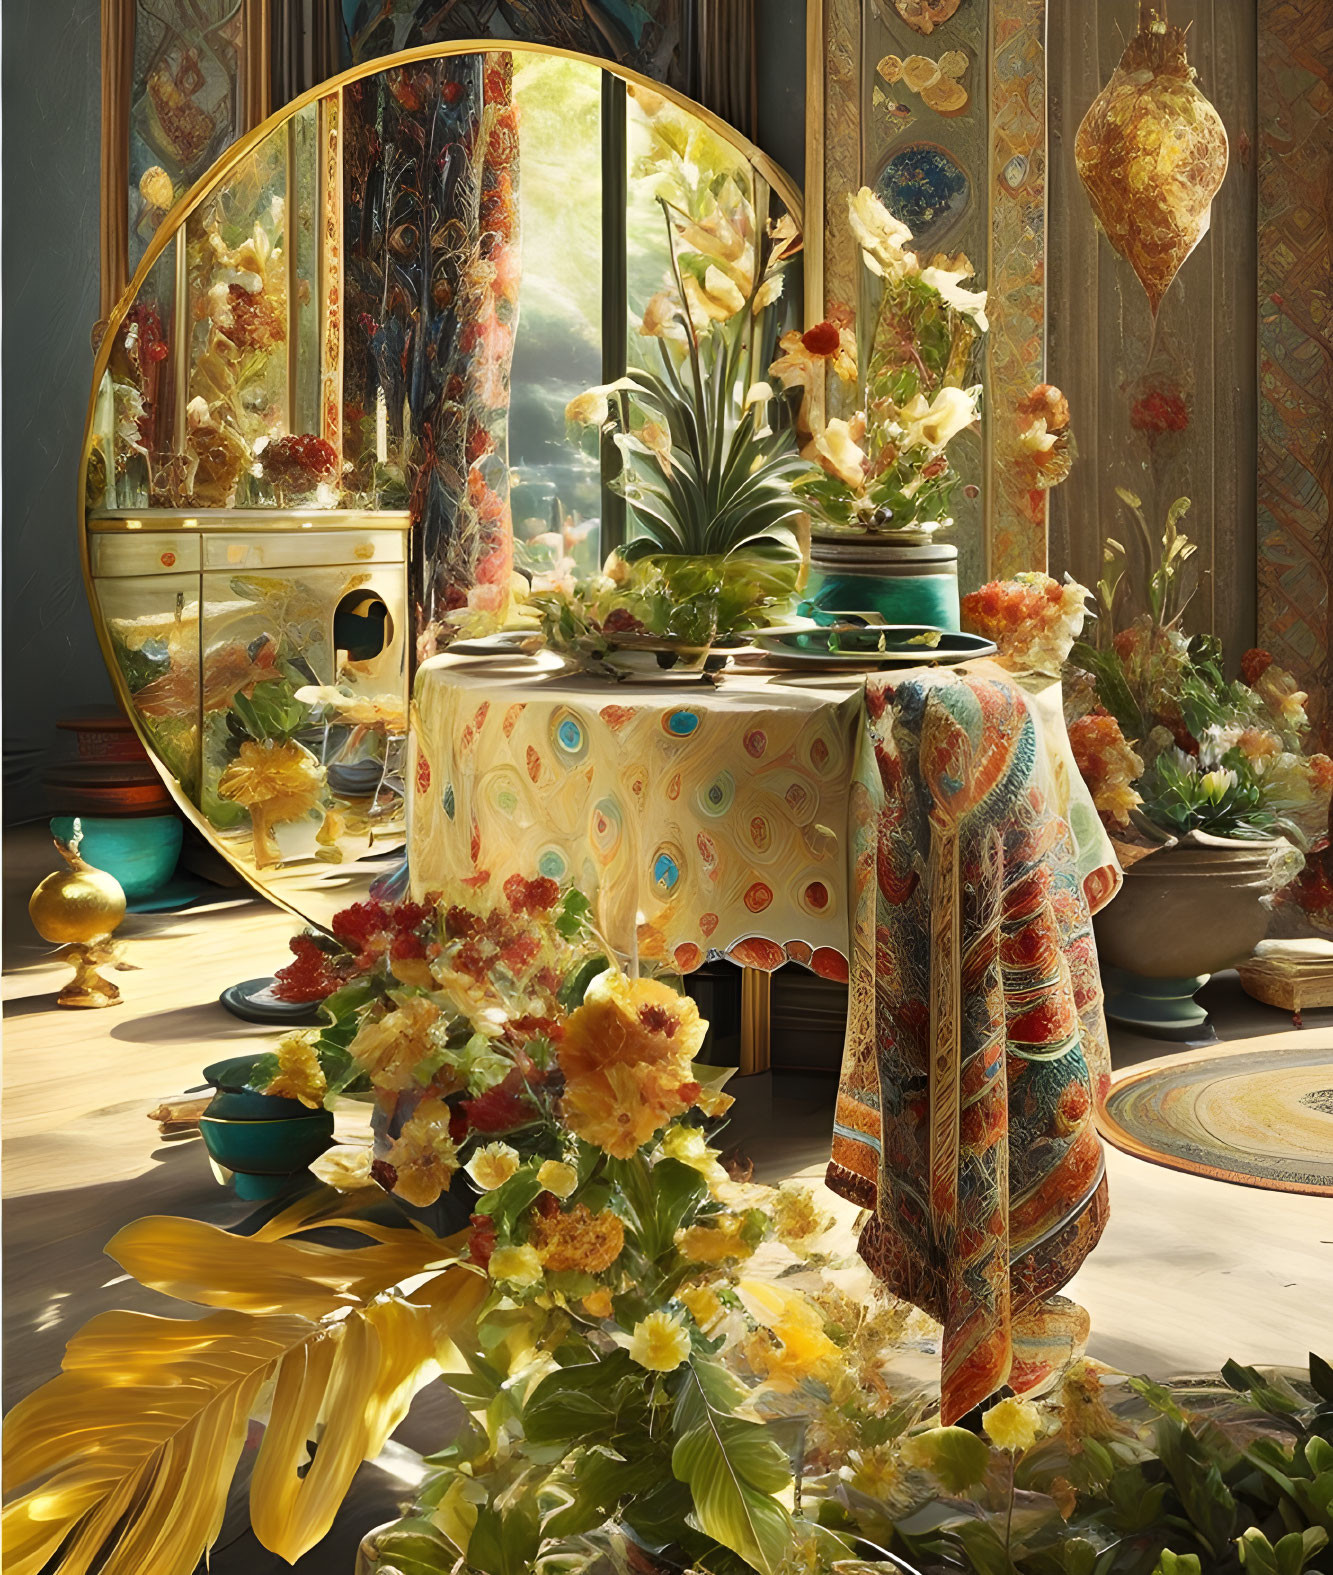 Bright sunlit room with ornate mirror, table with plants and flowers, draped textiles and pottery.